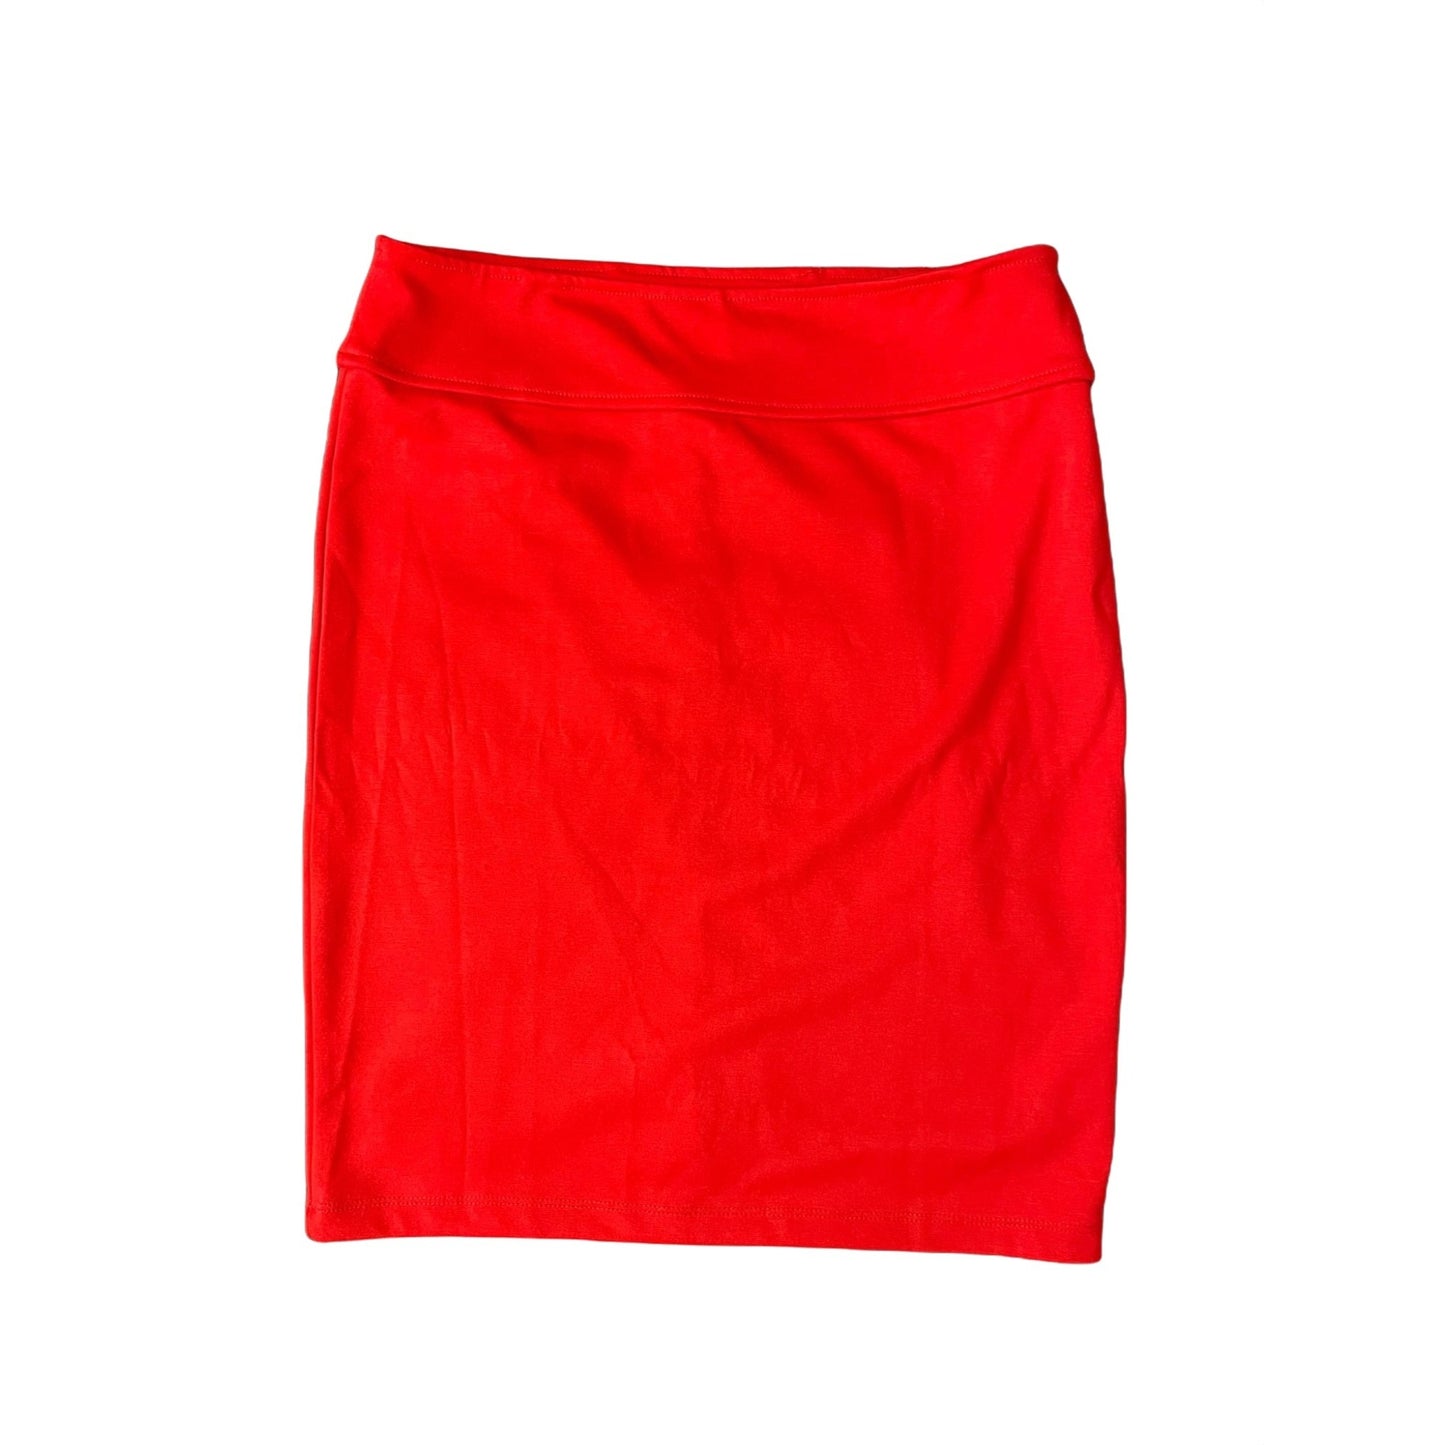 Red Pencil Skirt - L